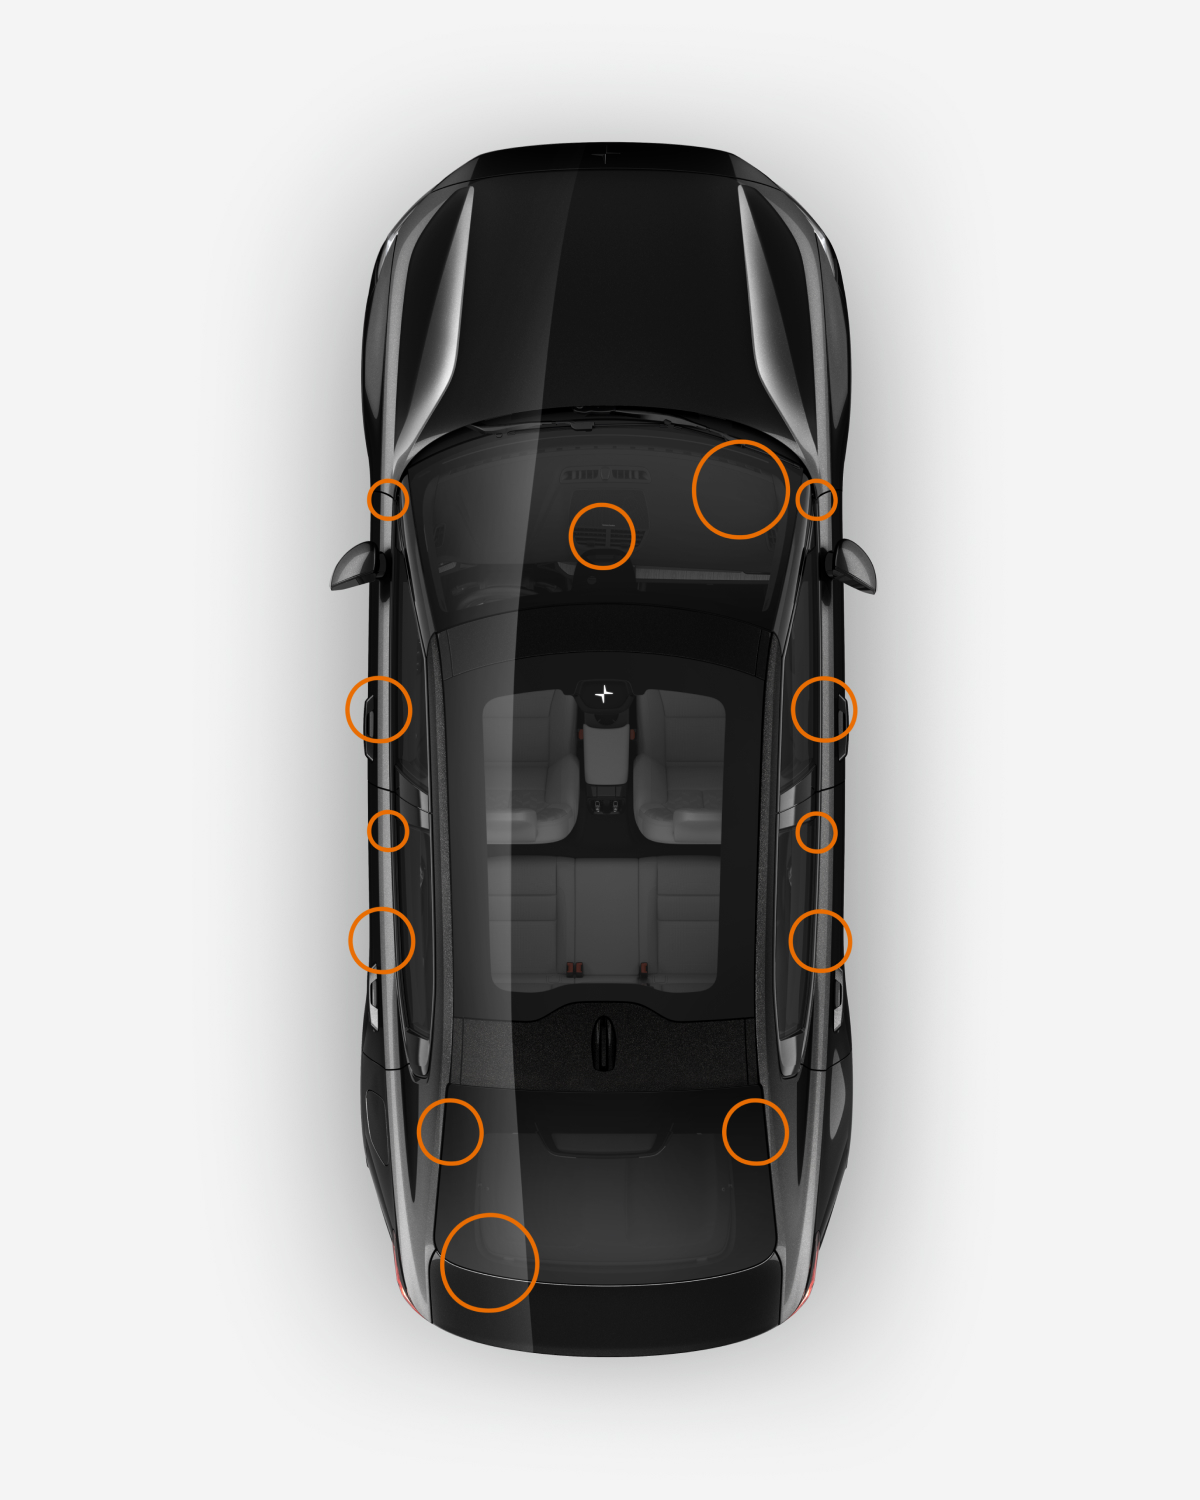 The Polestar 2 from above showing how the perfect accoustic is tuned based in the type of music playing